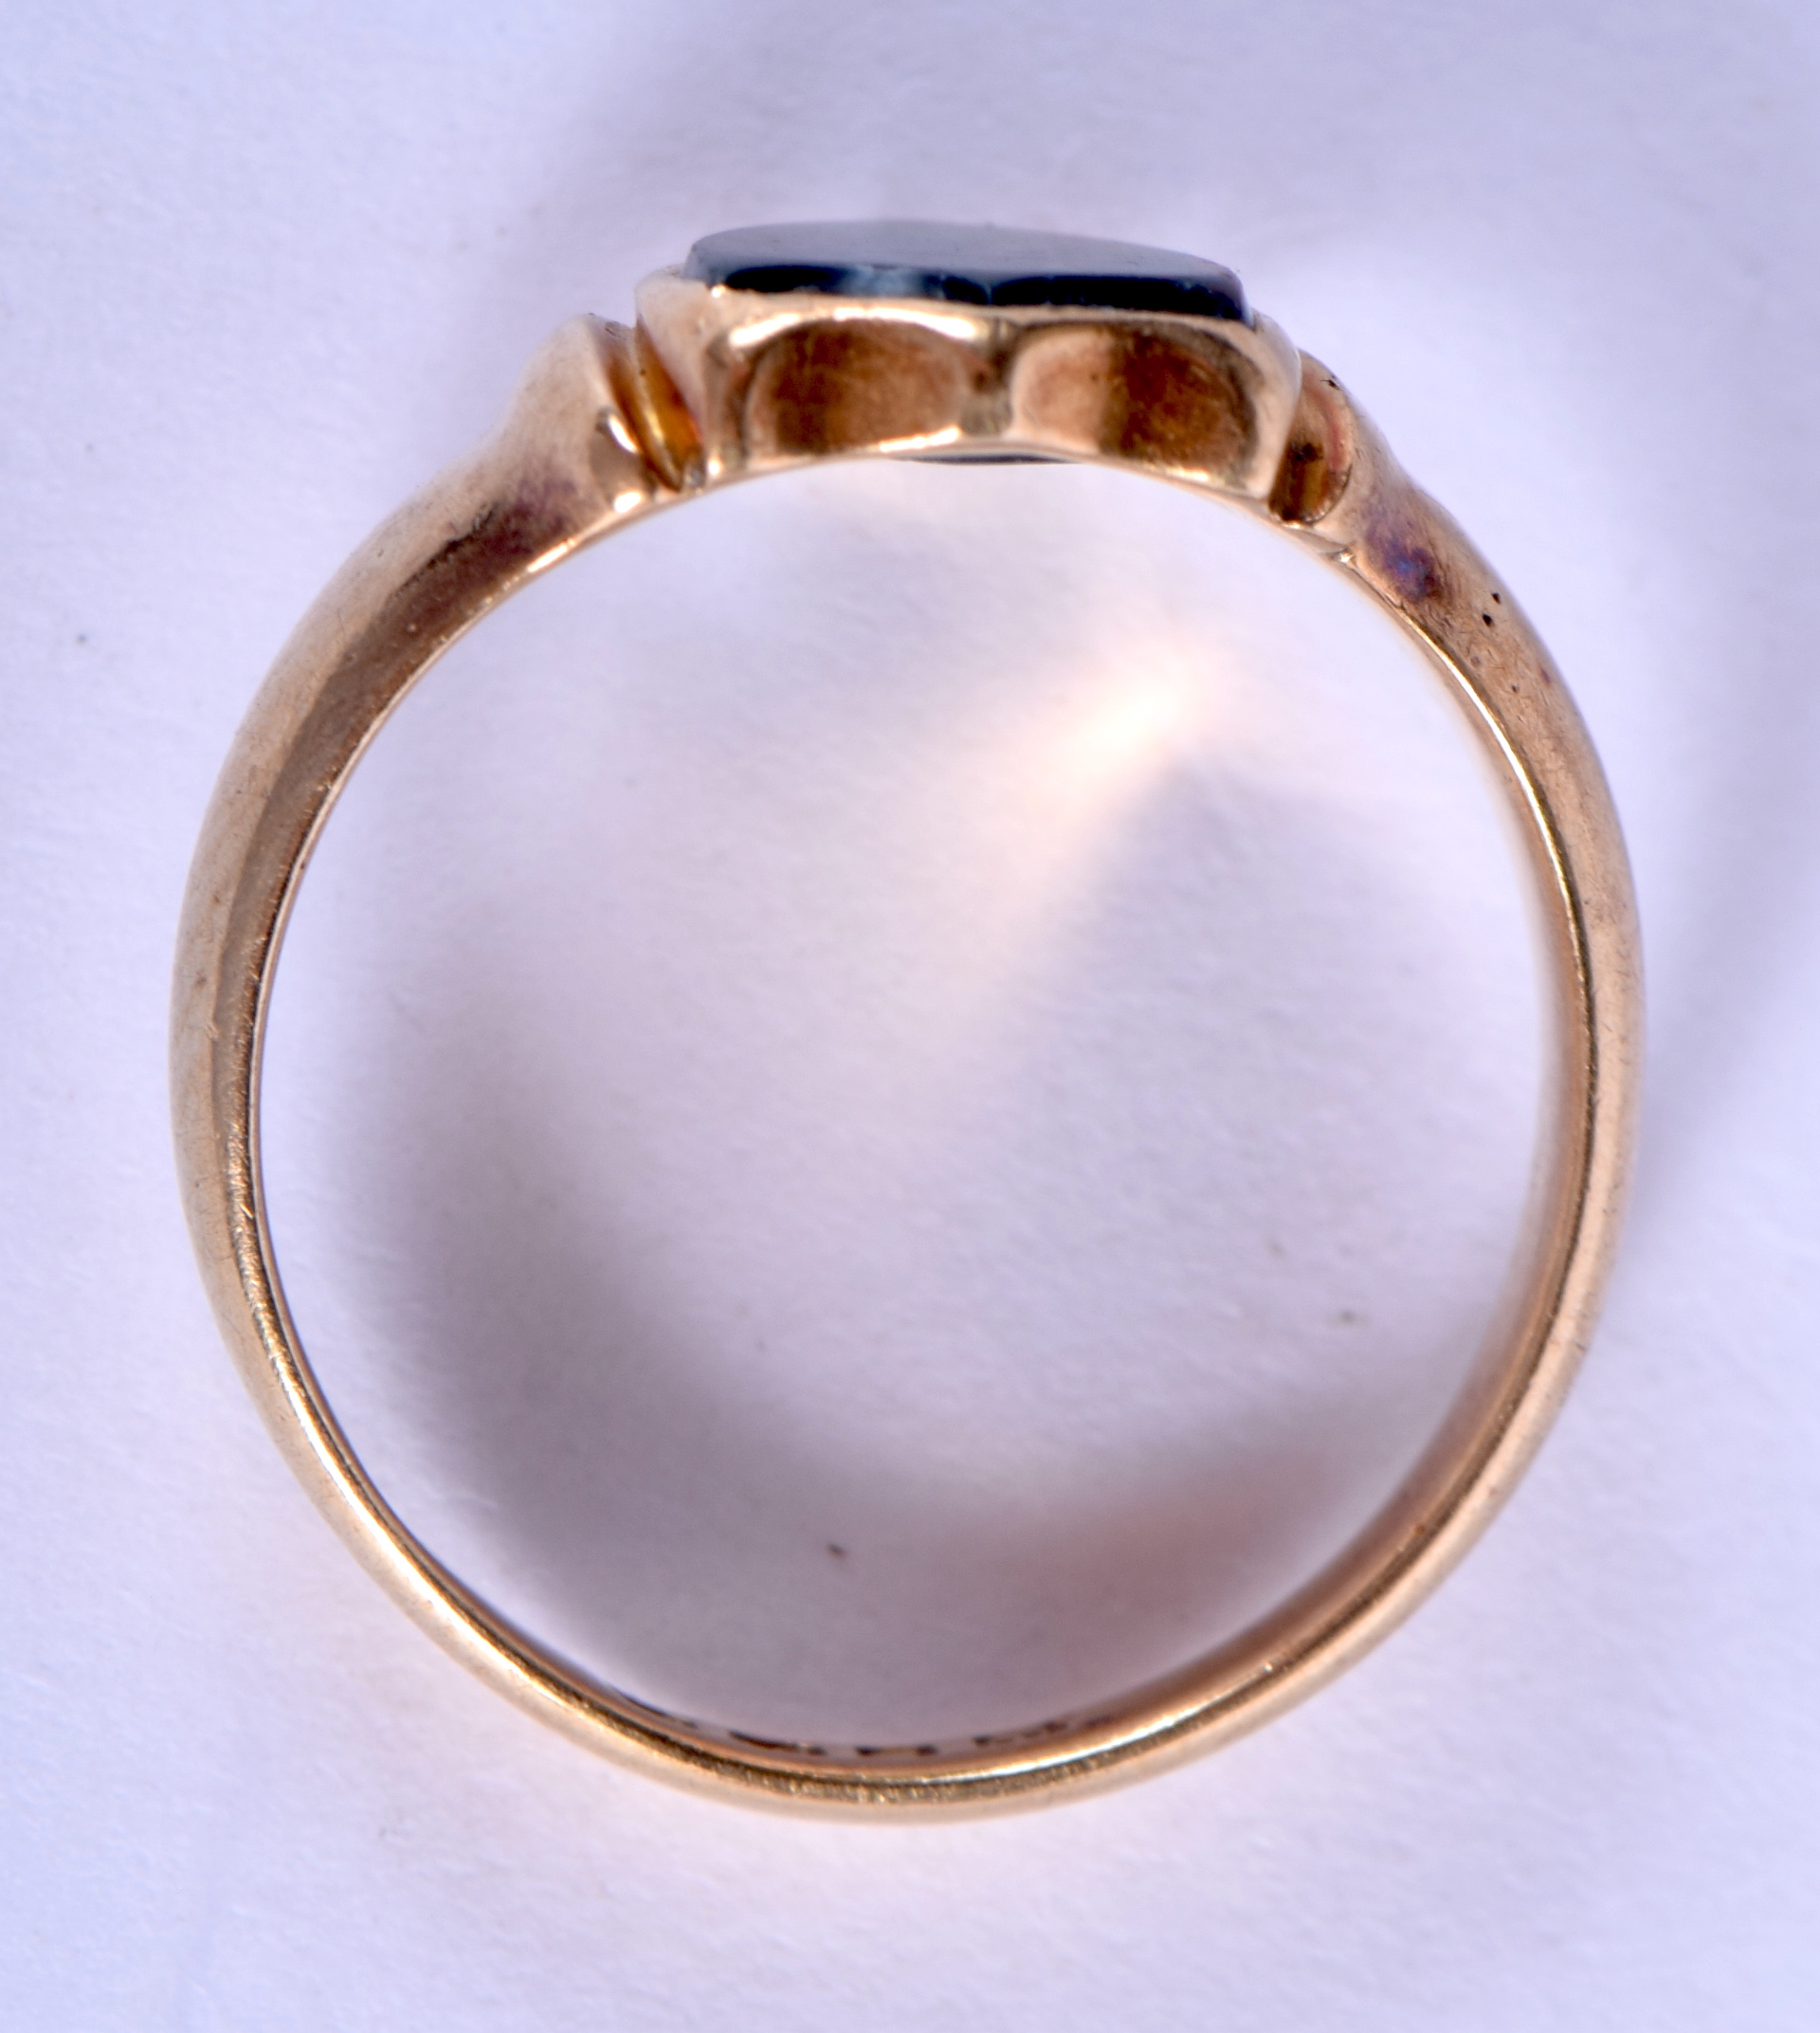 AN 18CT GOLD SHIELD RING. 3.3 grams. L. - Image 2 of 3